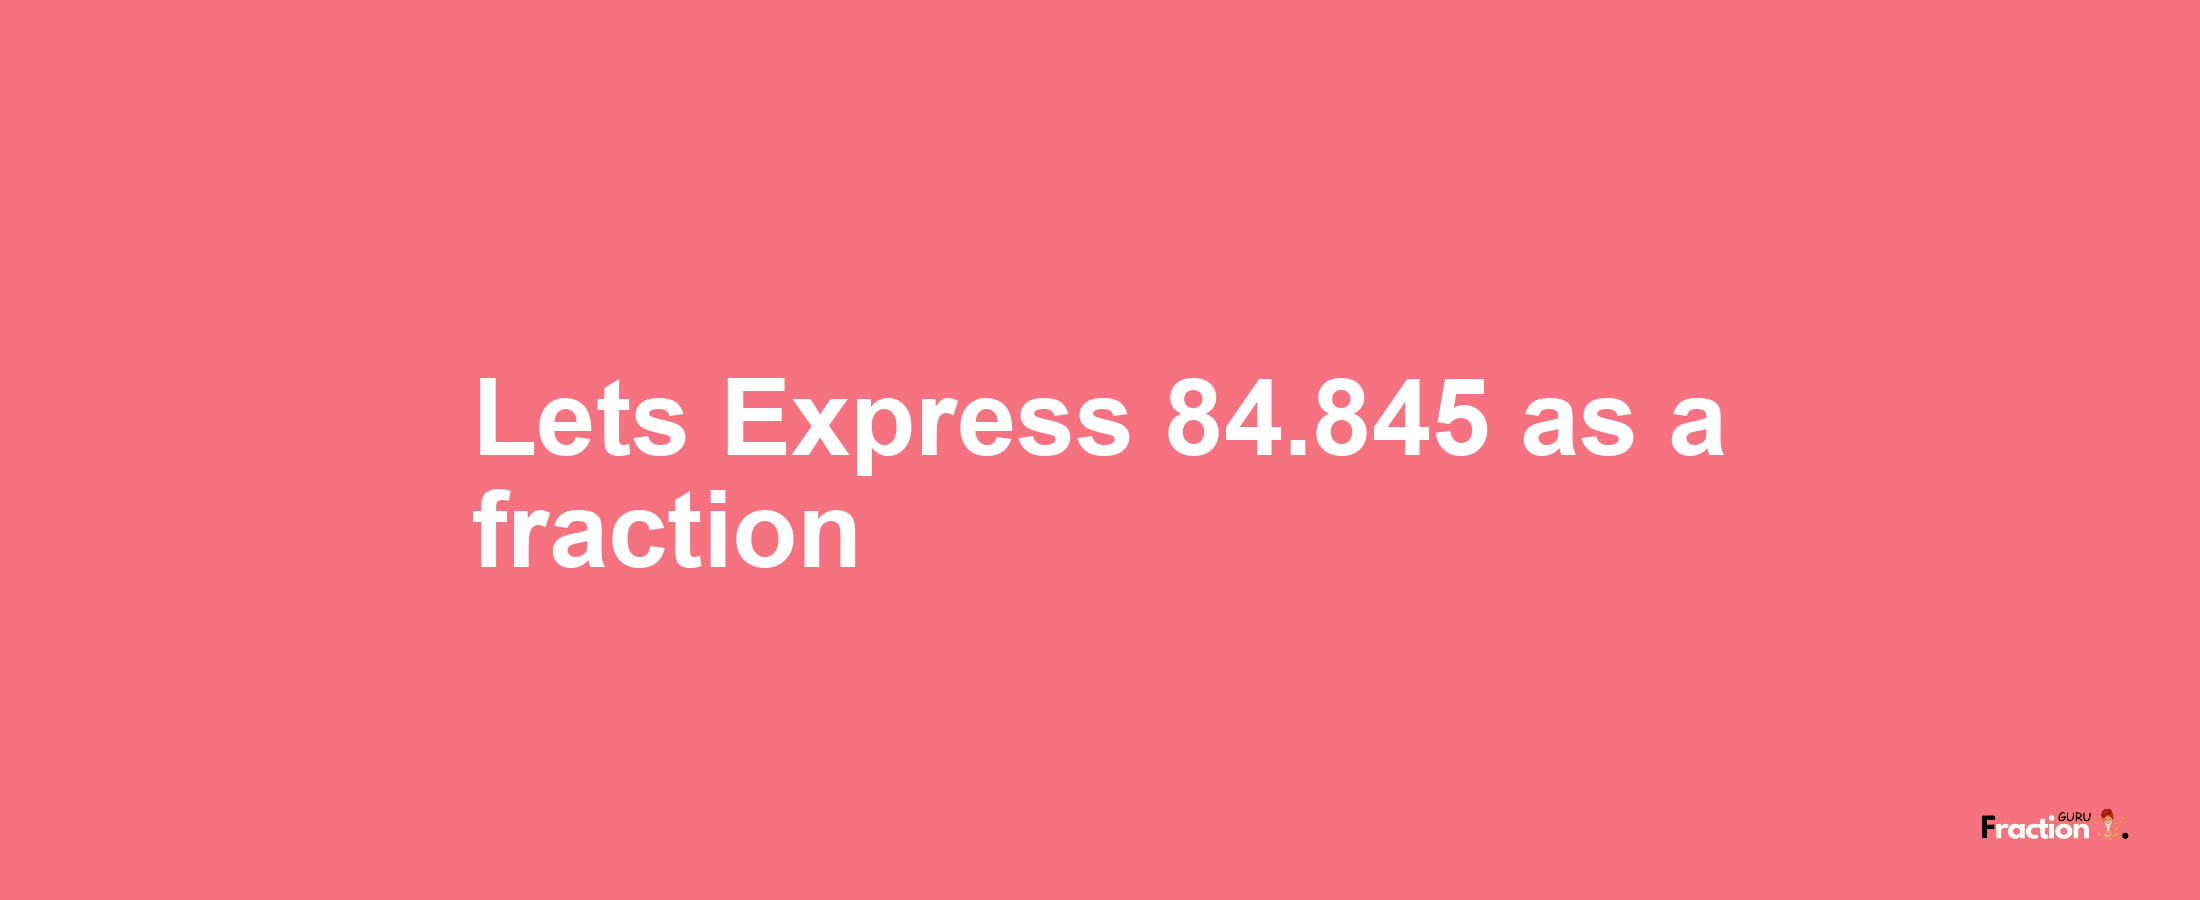 Lets Express 84.845 as afraction